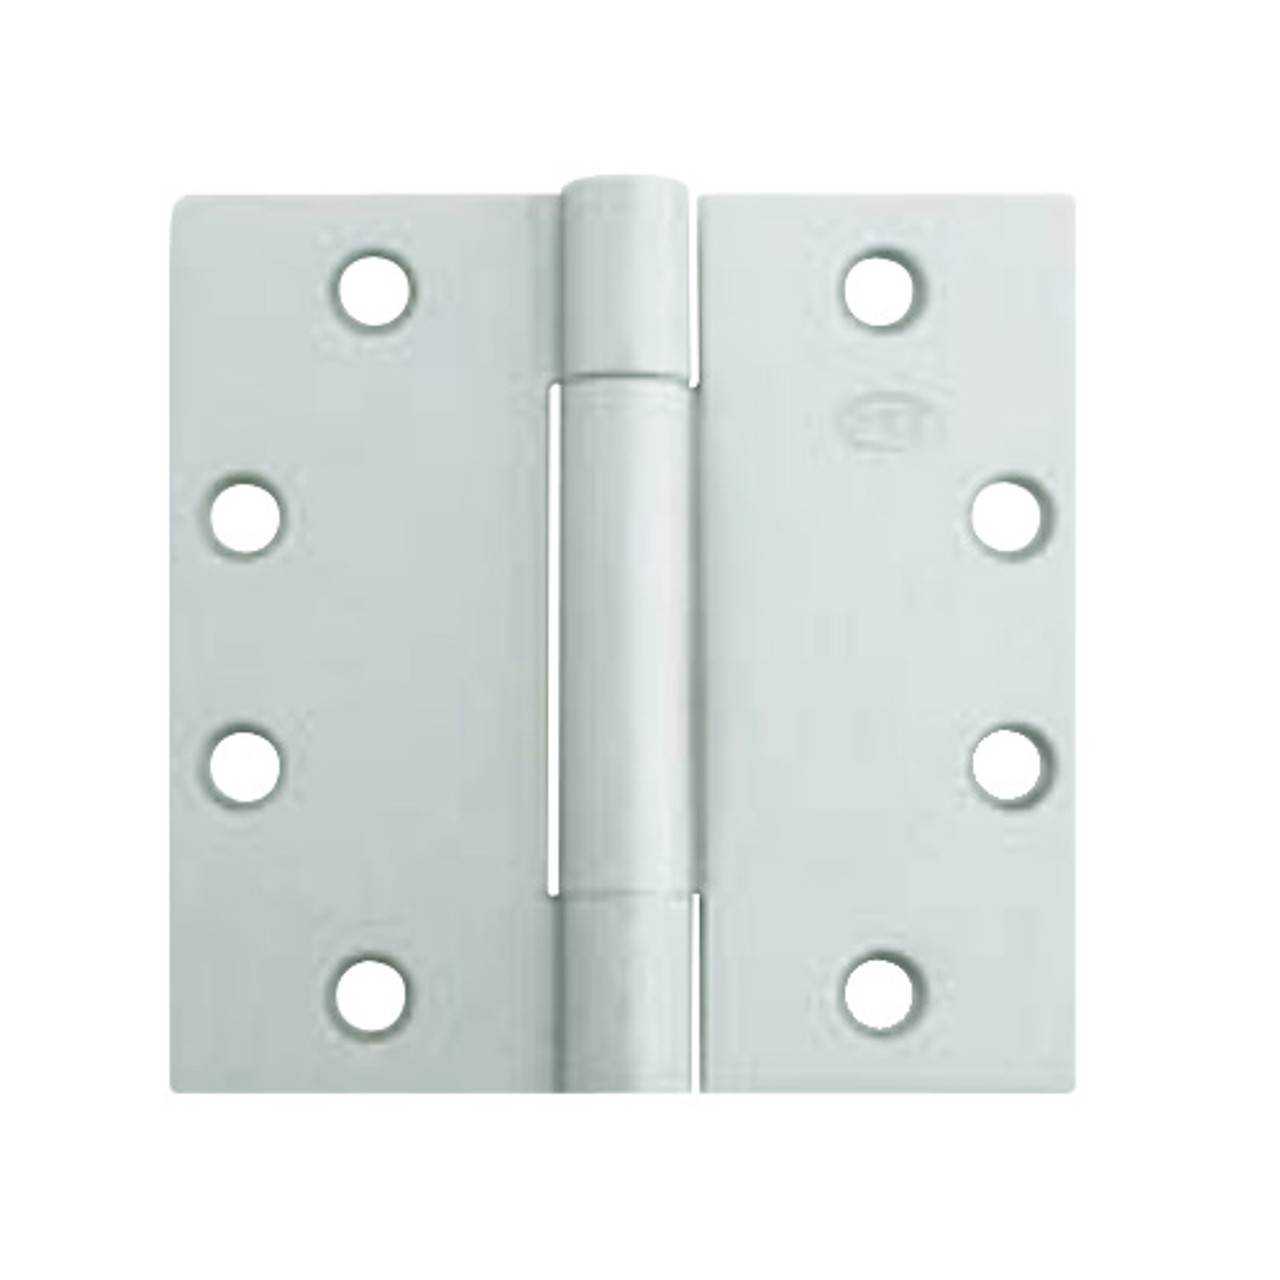 3CB1-4-5x4-646 IVES 3 Knuckle Concealed Bearing Full Mortise Hinge in Satin Nickel Plated